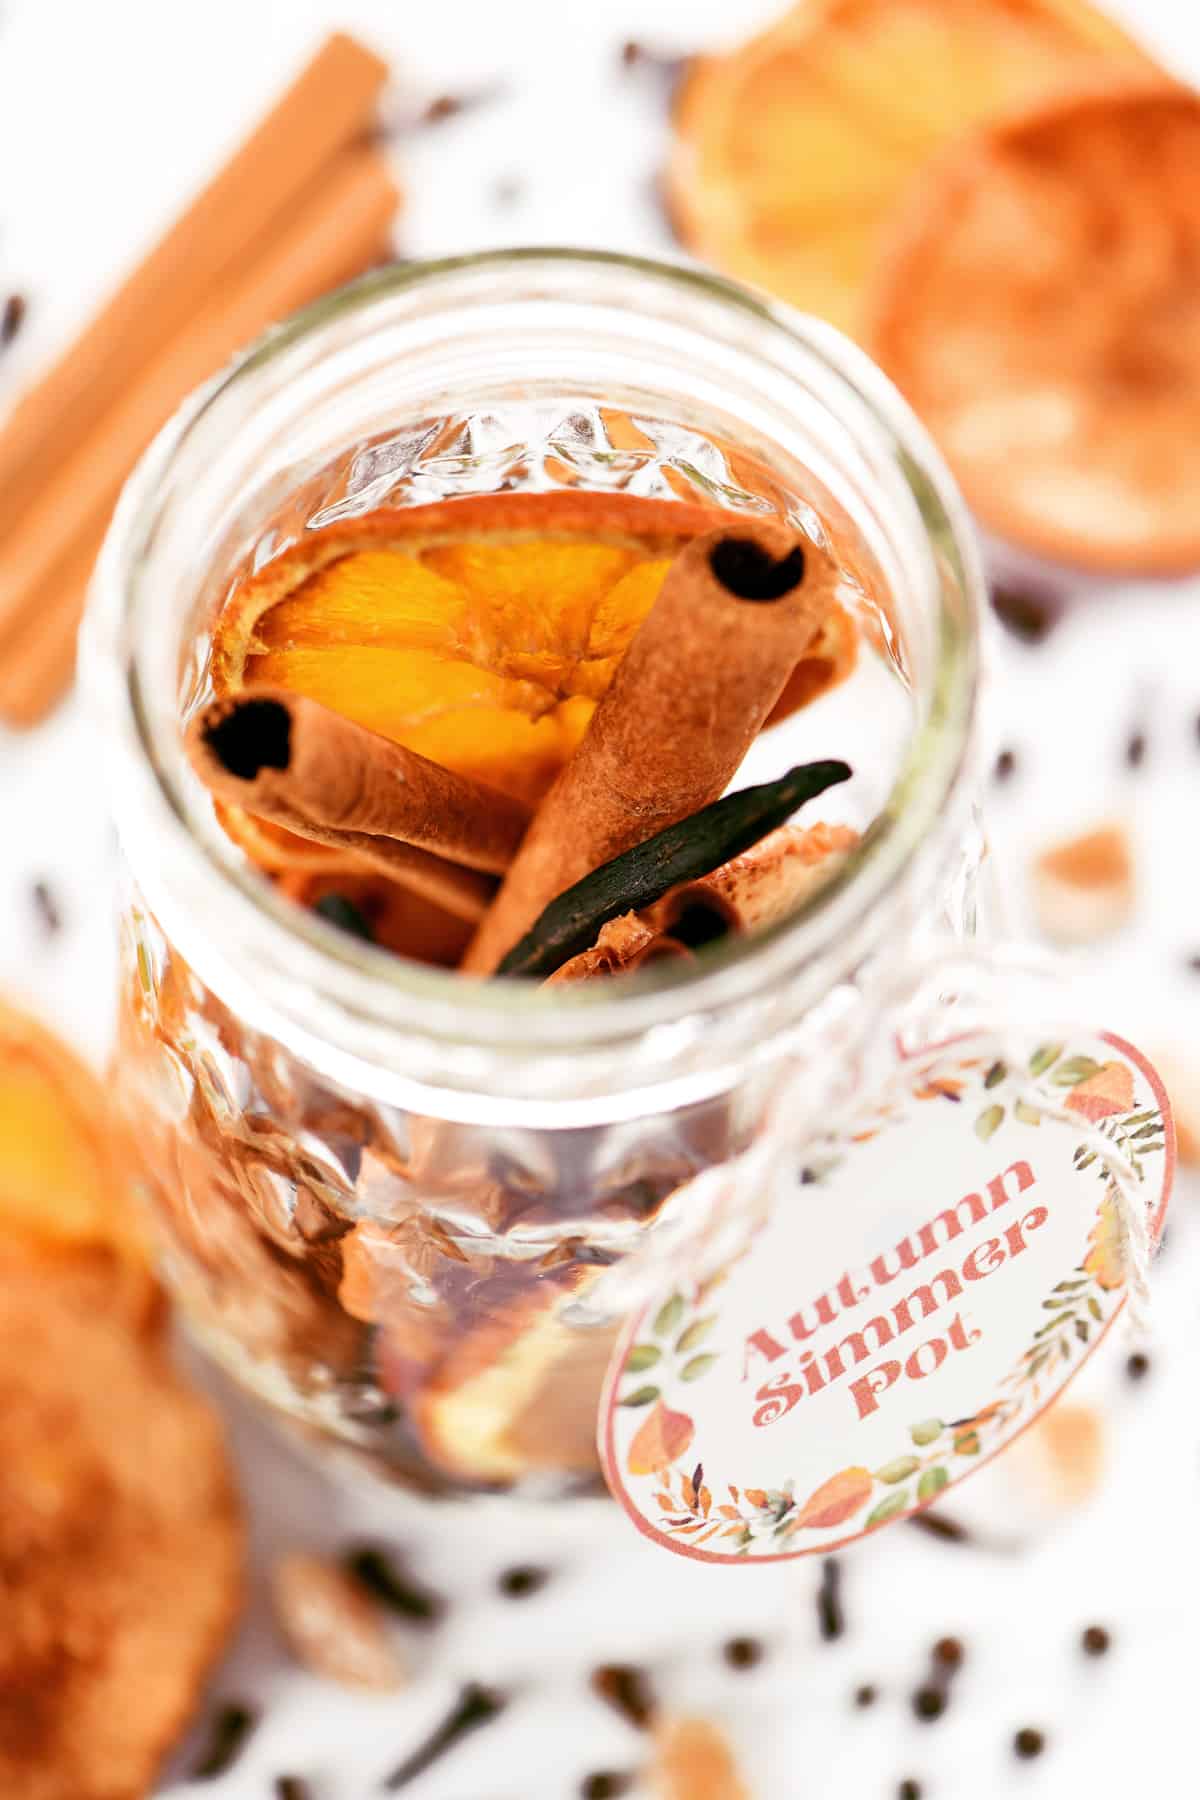 Cinnamon sticks, vanilla and other spices and fruit in a glass jar.